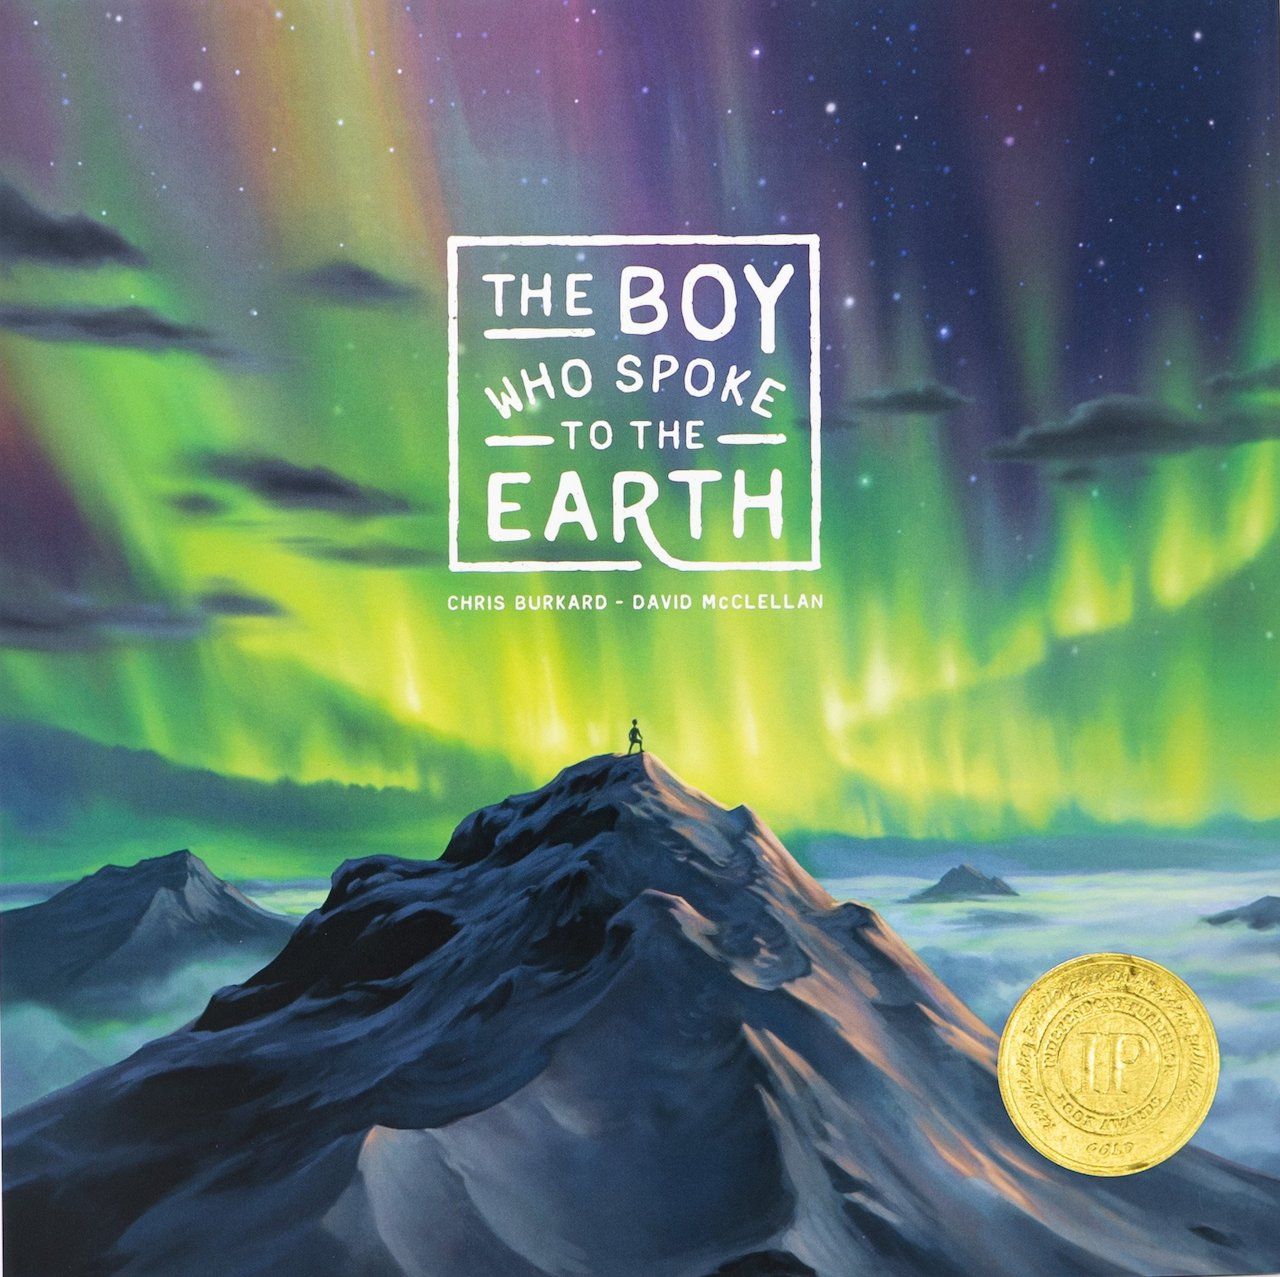 Cover of the book "The Boy who Spoke to the Earth"